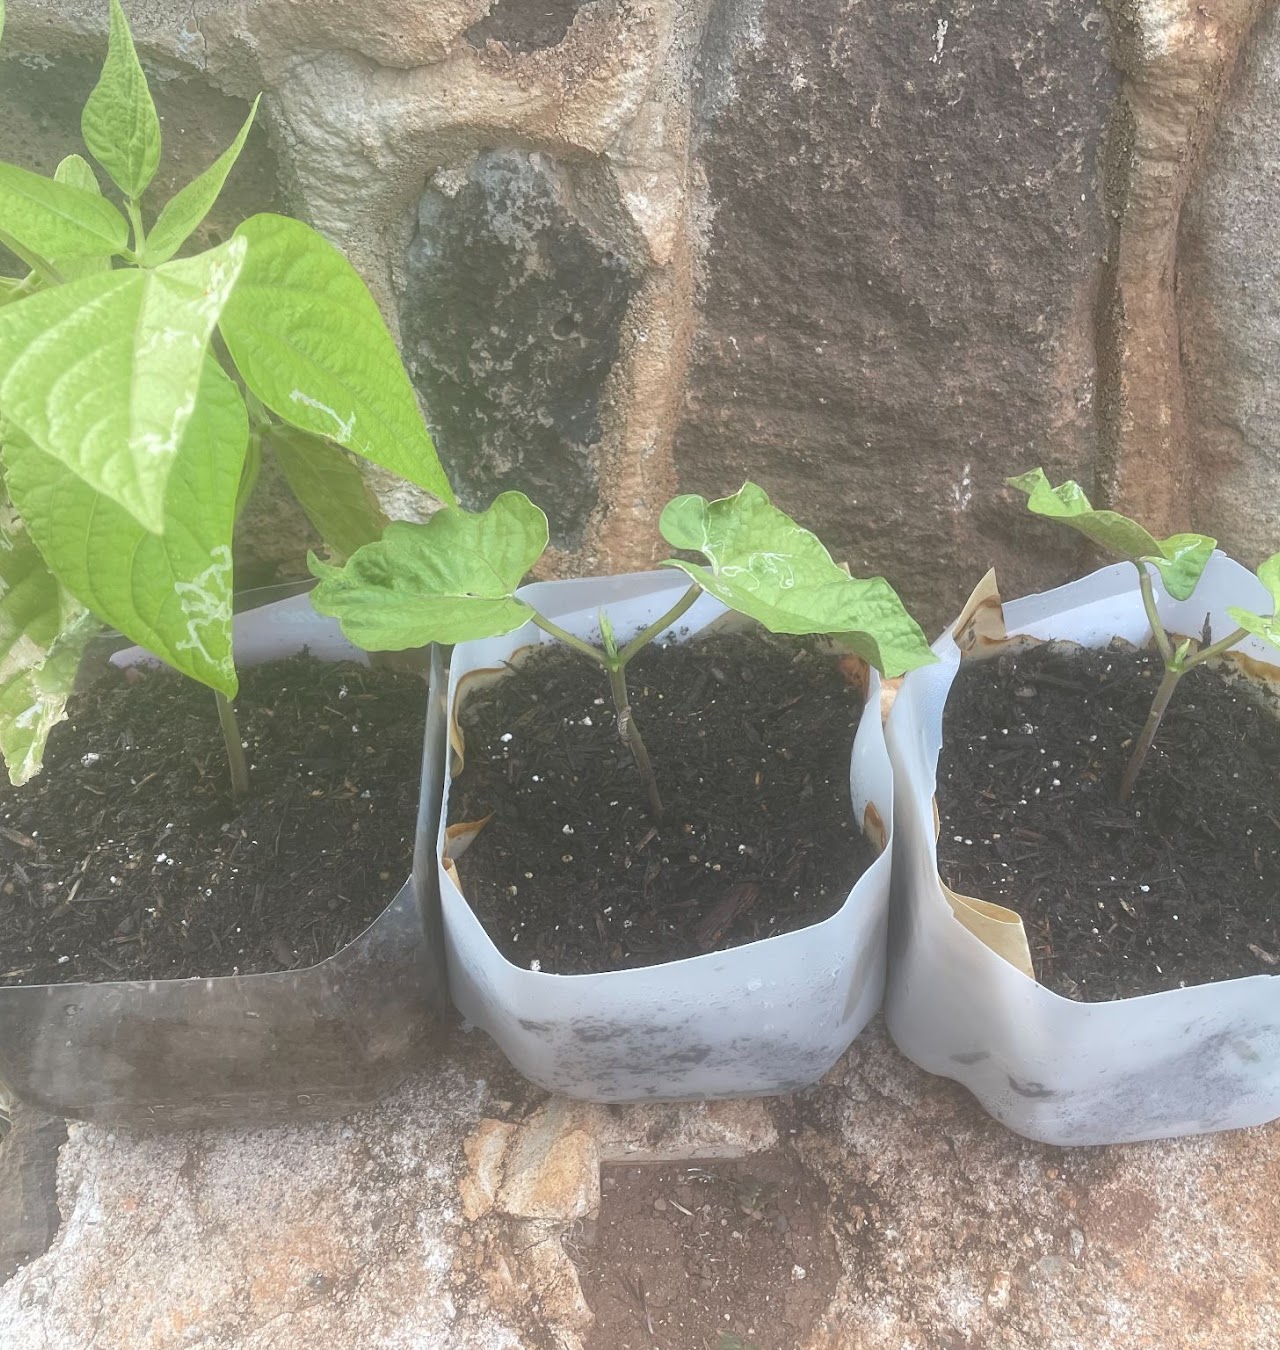 Potted green bean plants